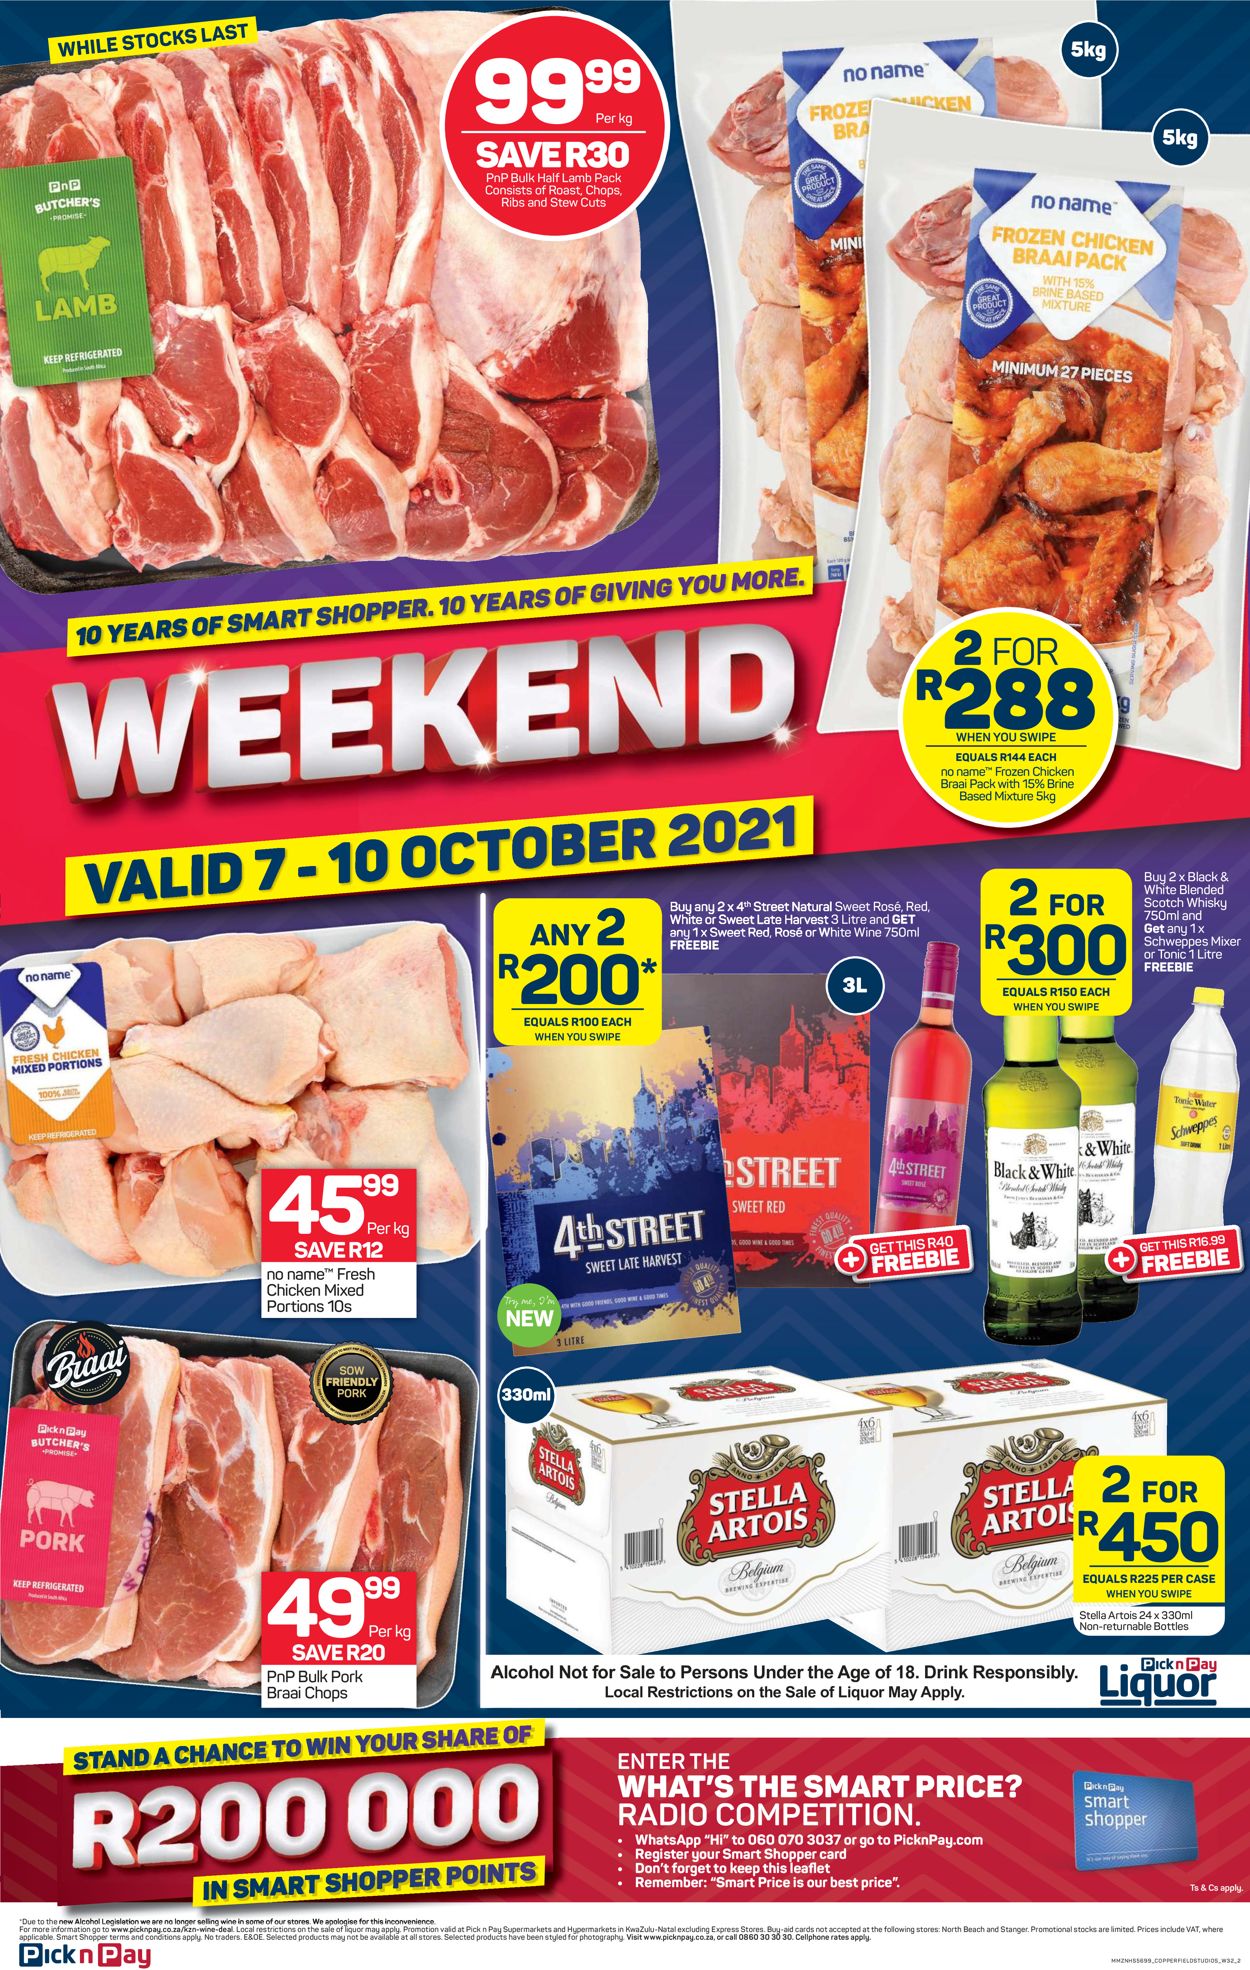 Pick n Pay Catalogue - 2021/10/07-2021/10/10 (Page 2)